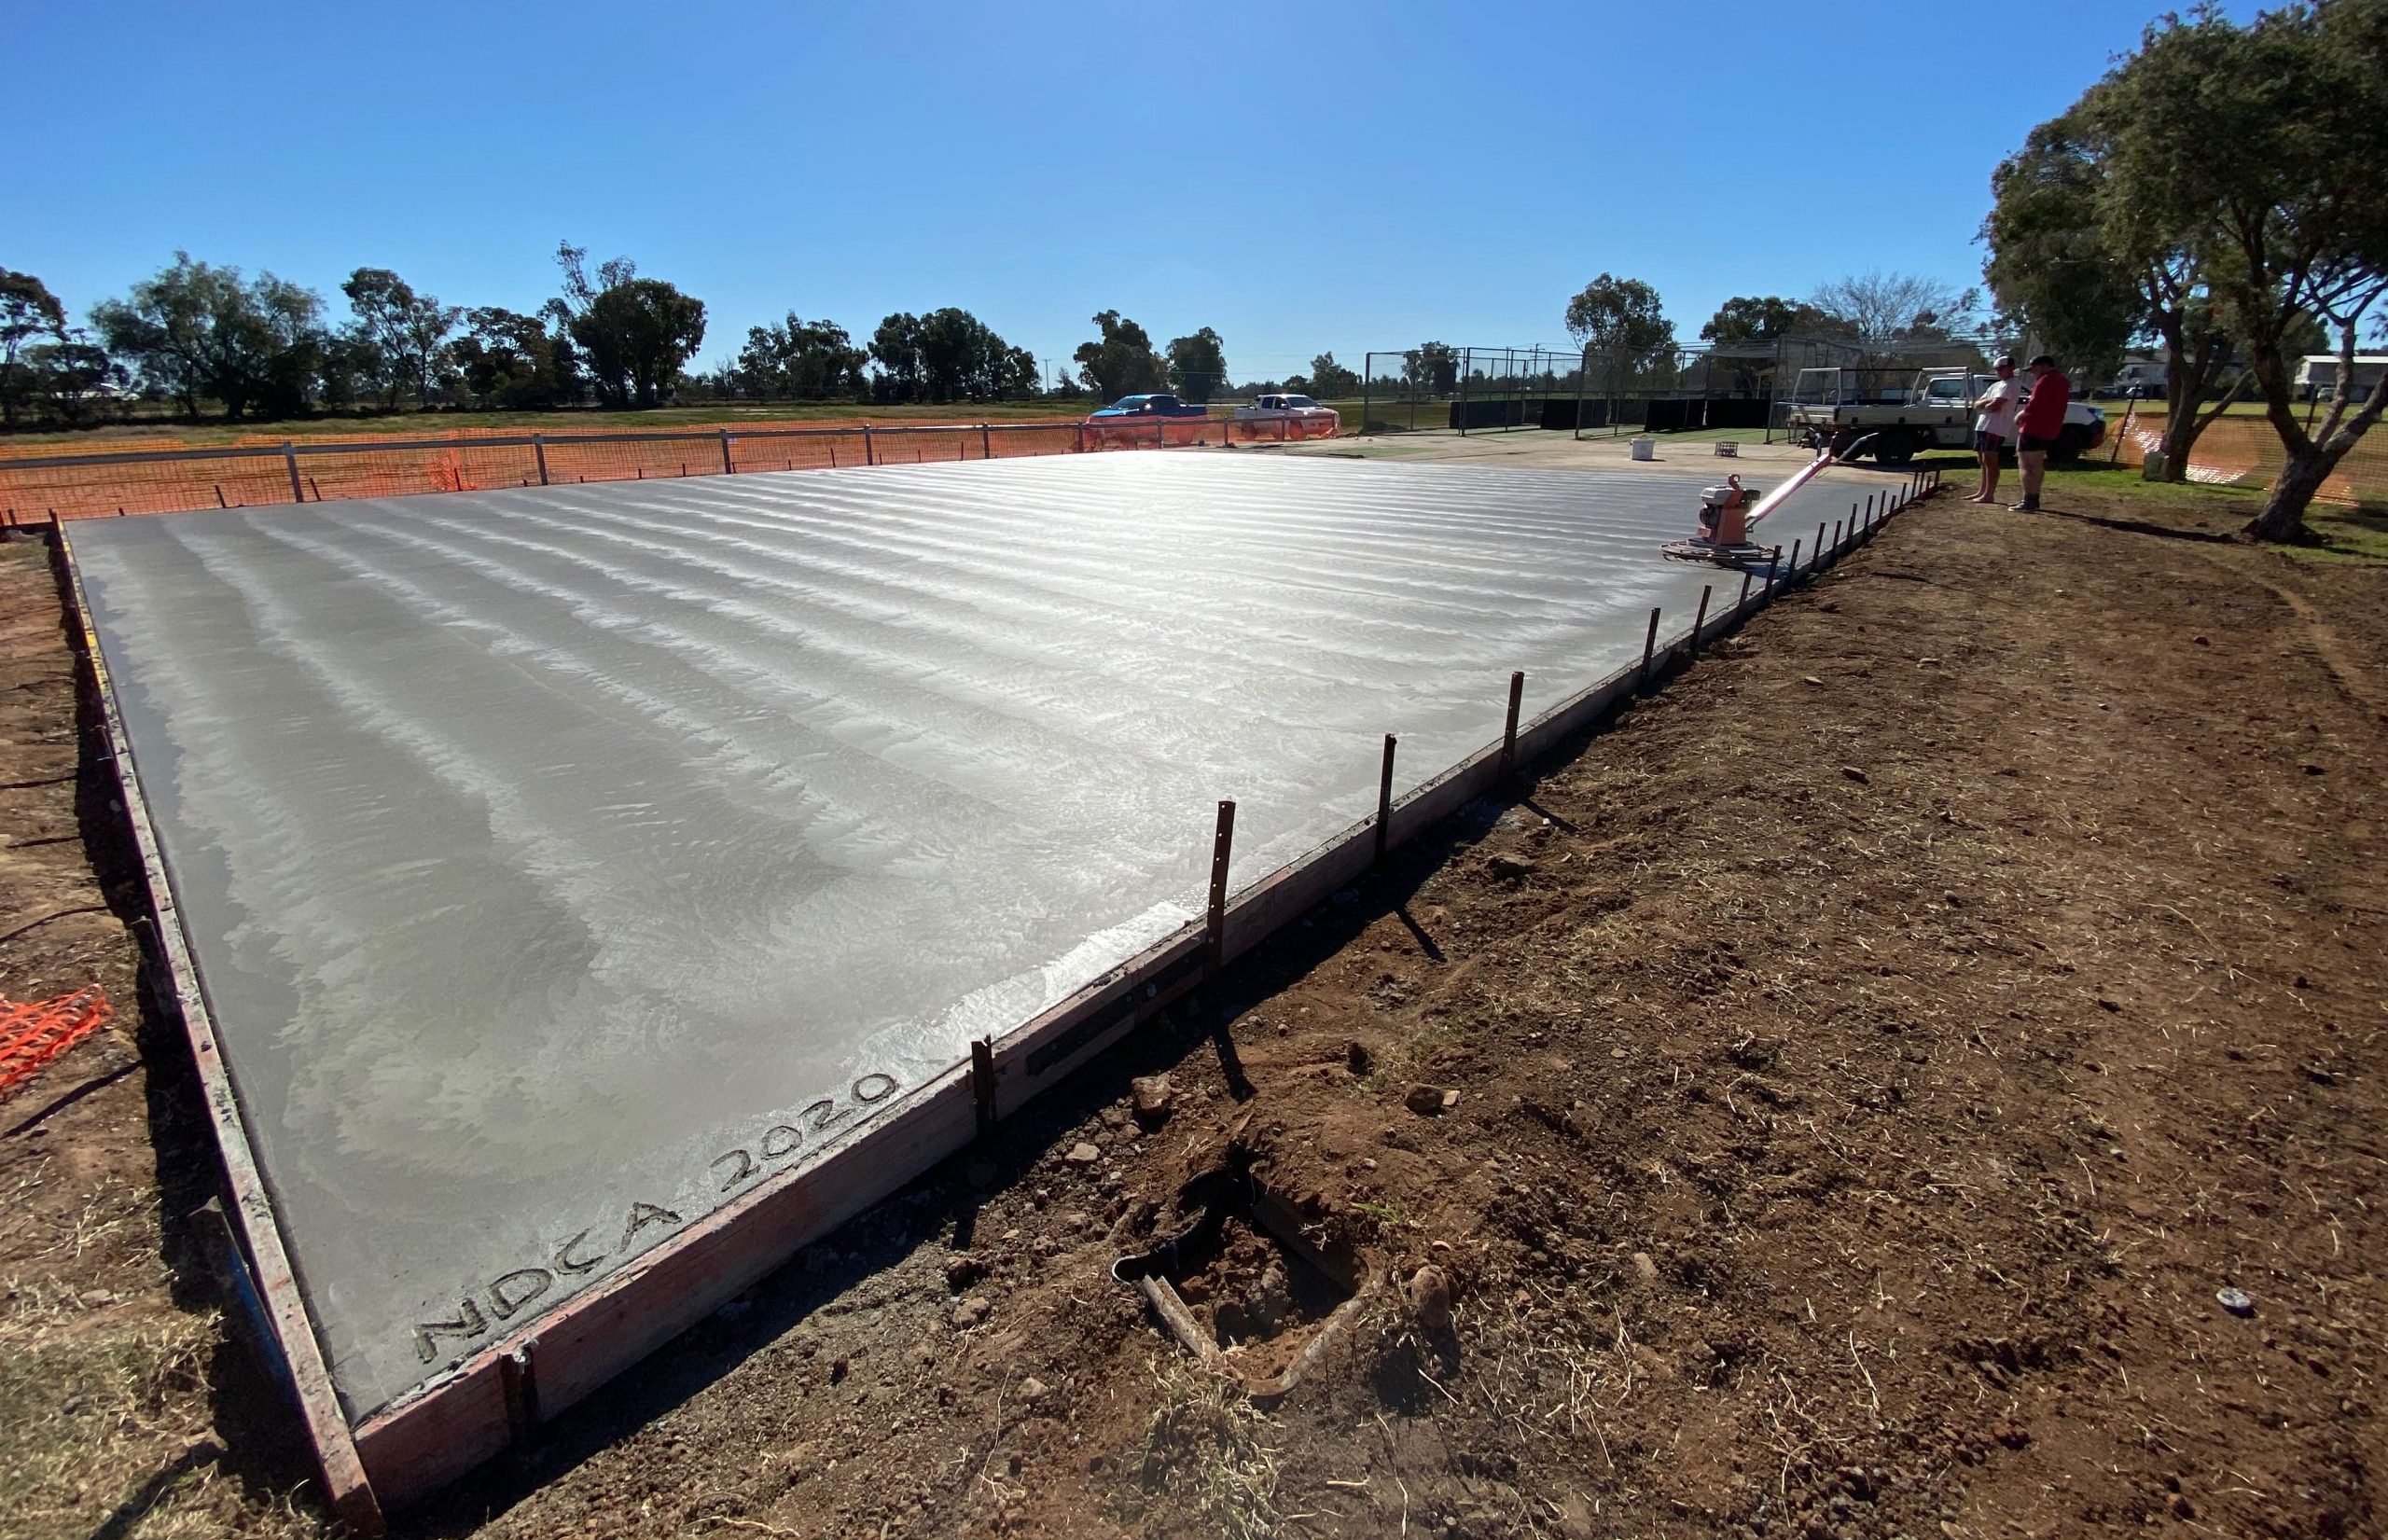 Brand new look at the Cooma Oval cricket nets